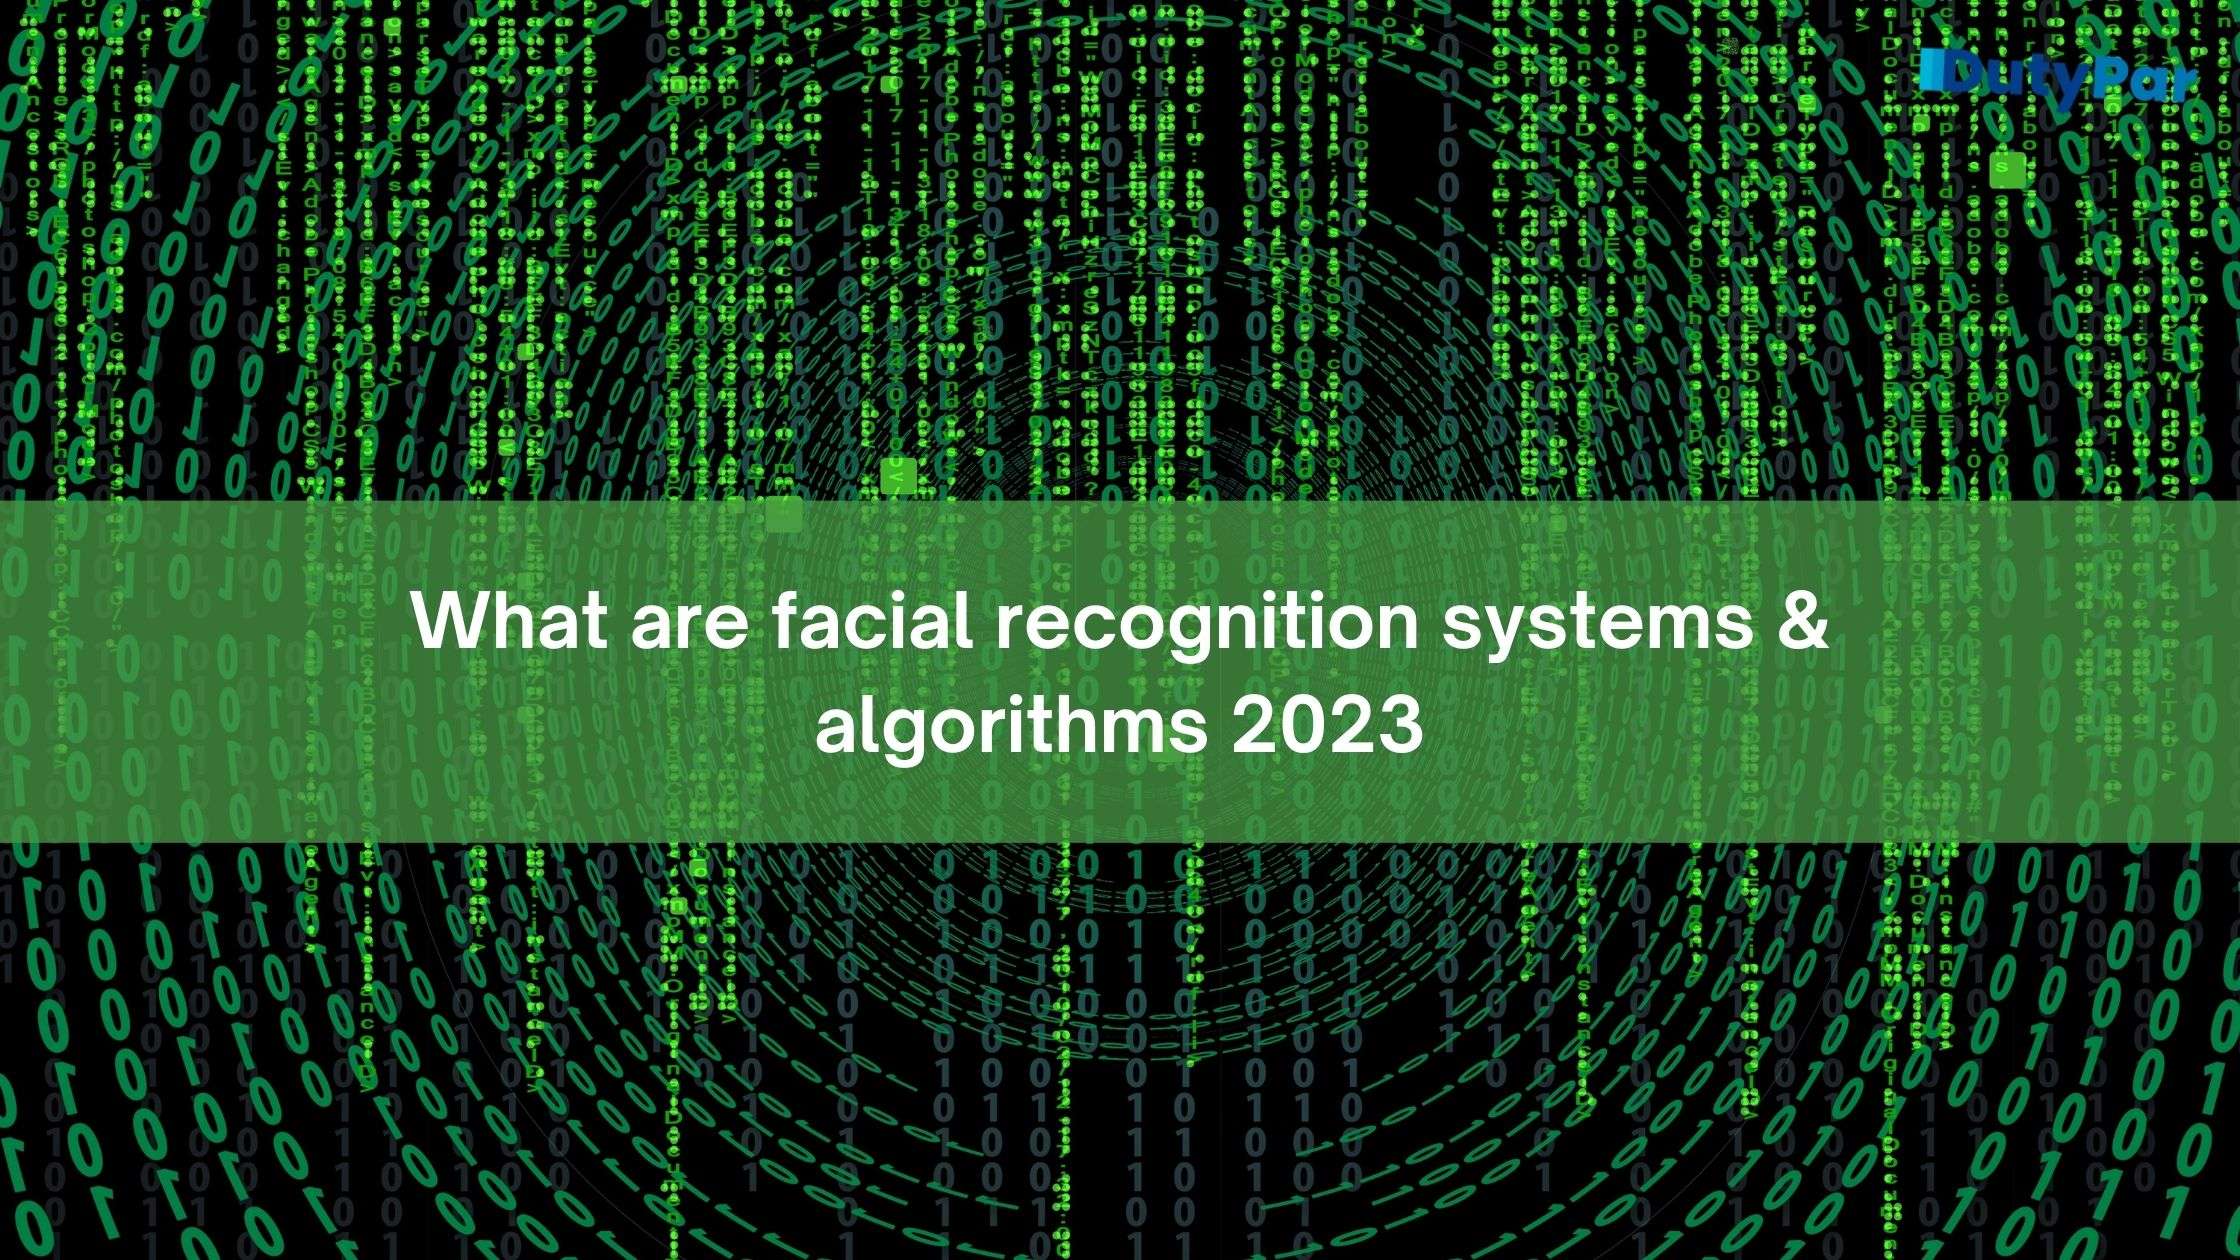 What are facial recognition systems & algorithms 2023